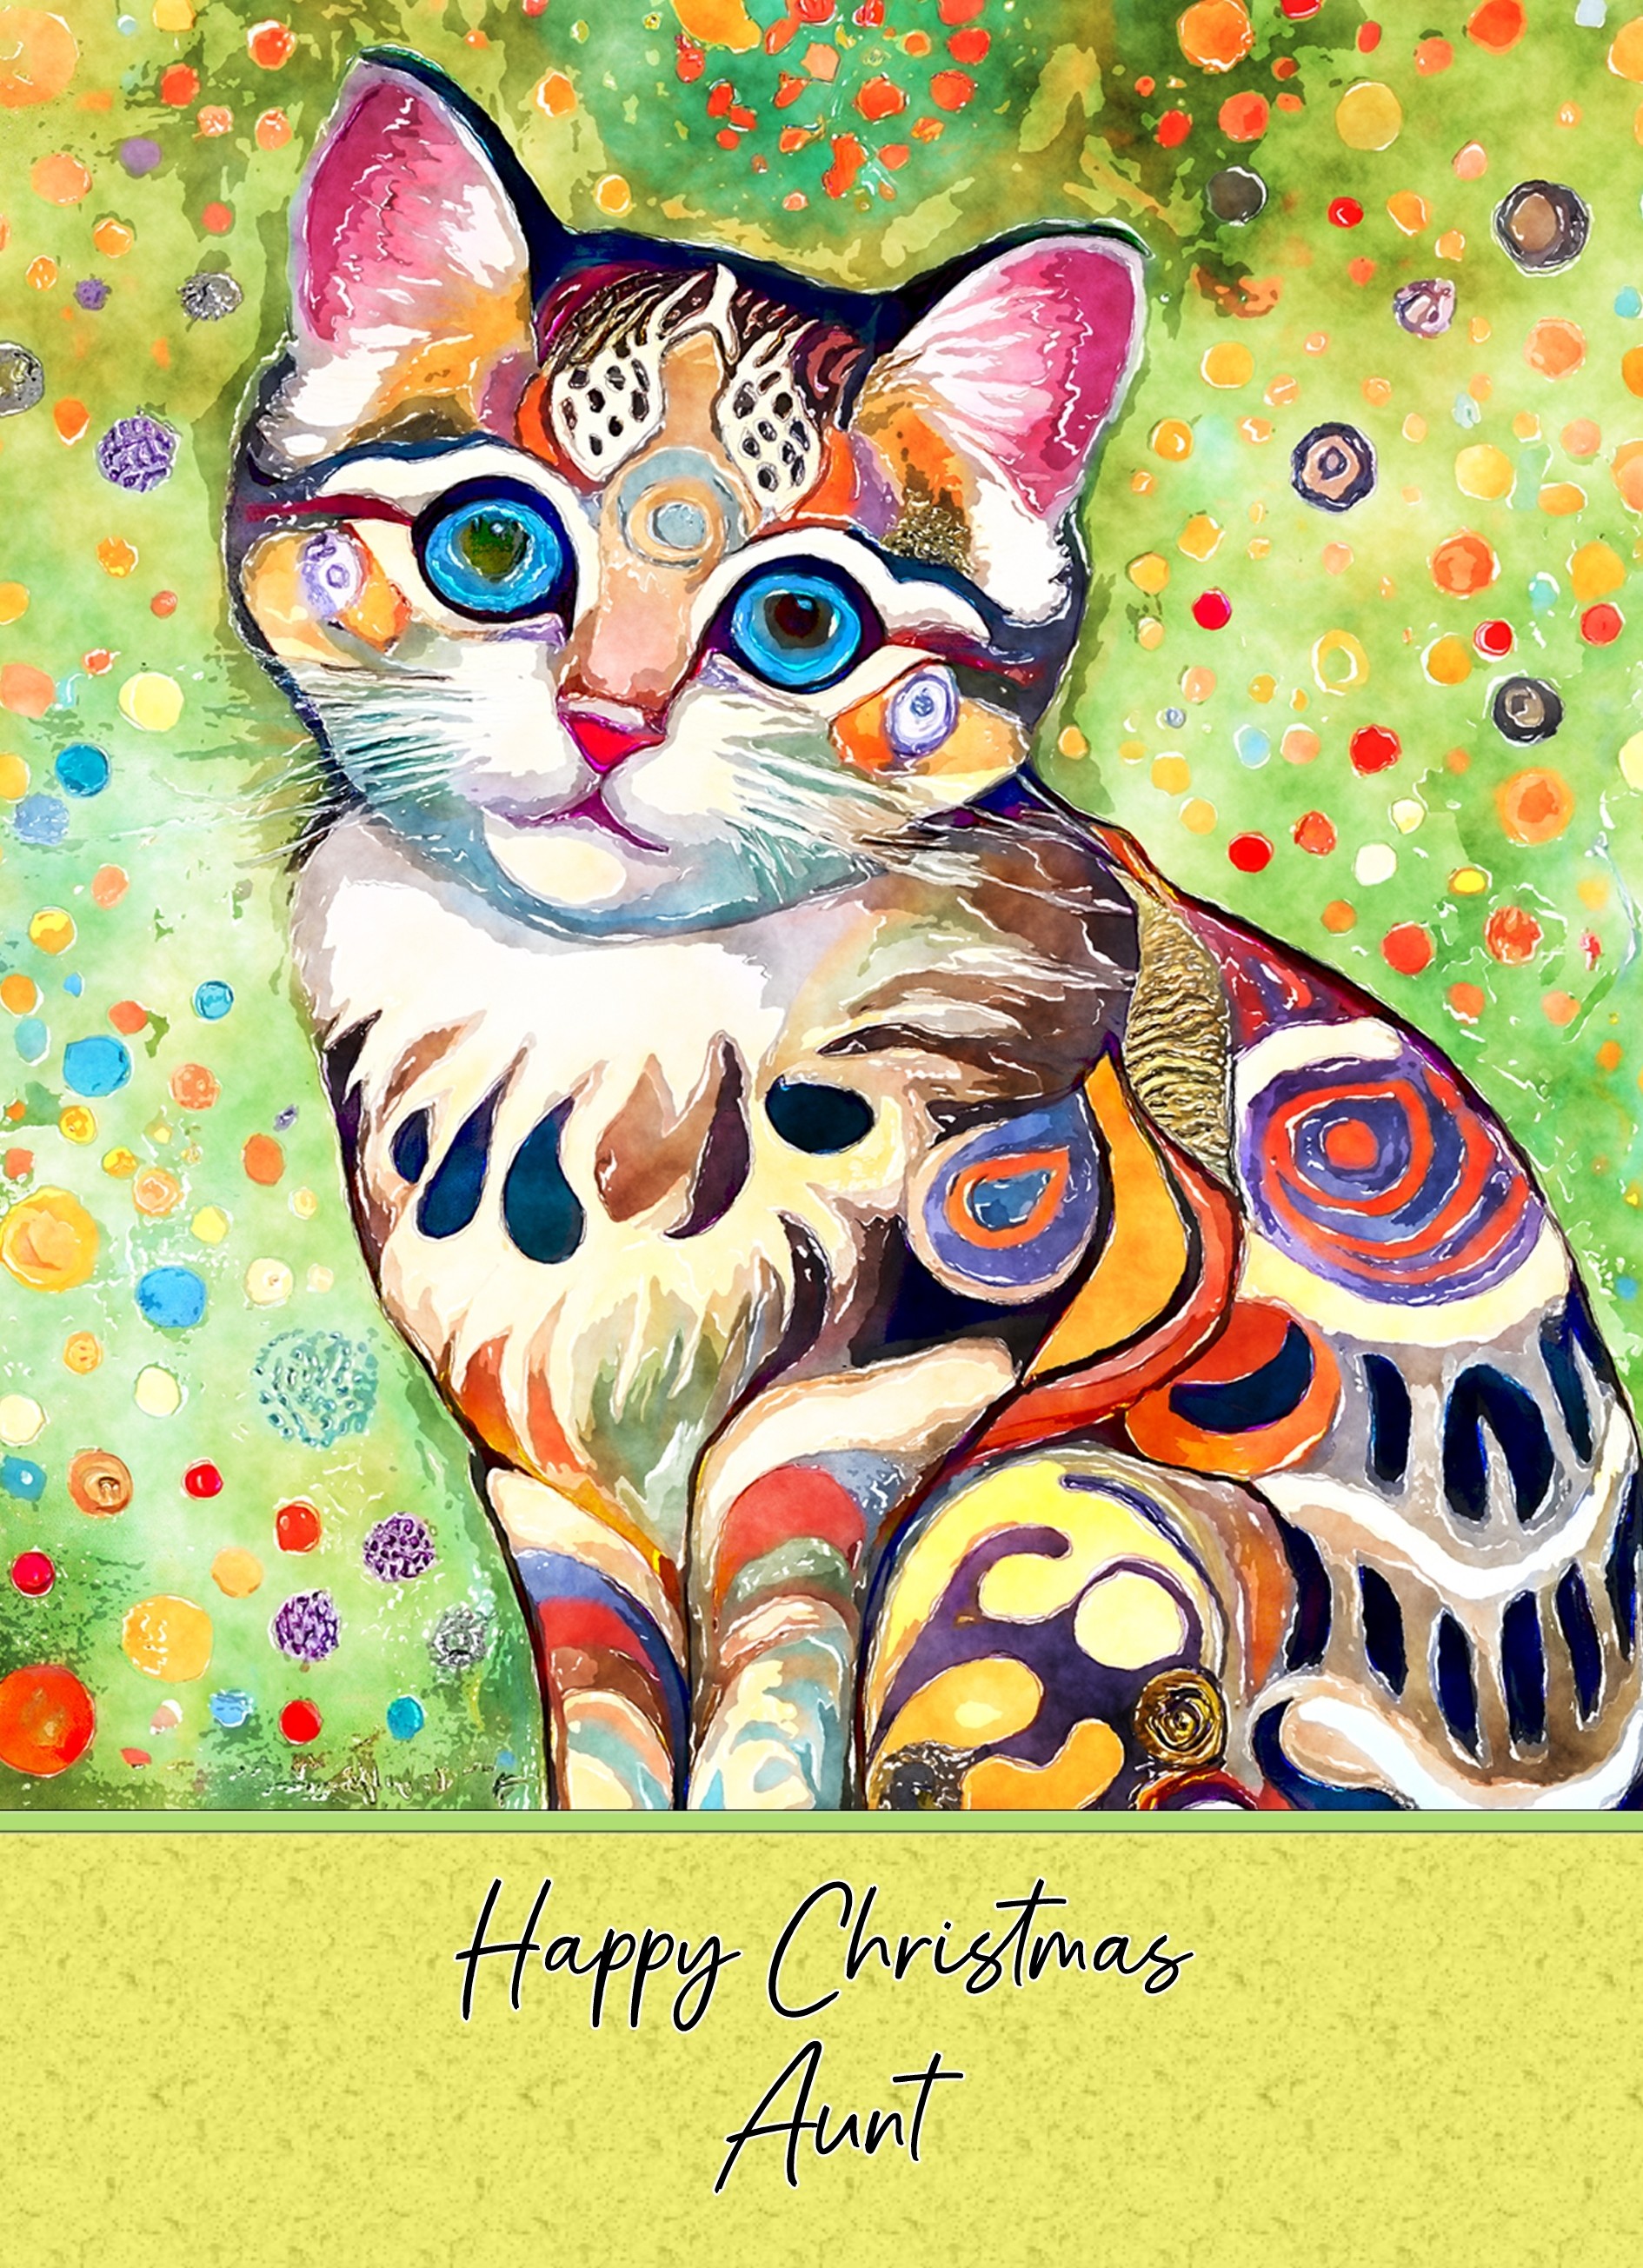 Christmas Card For Aunt (Cat Art Painting)